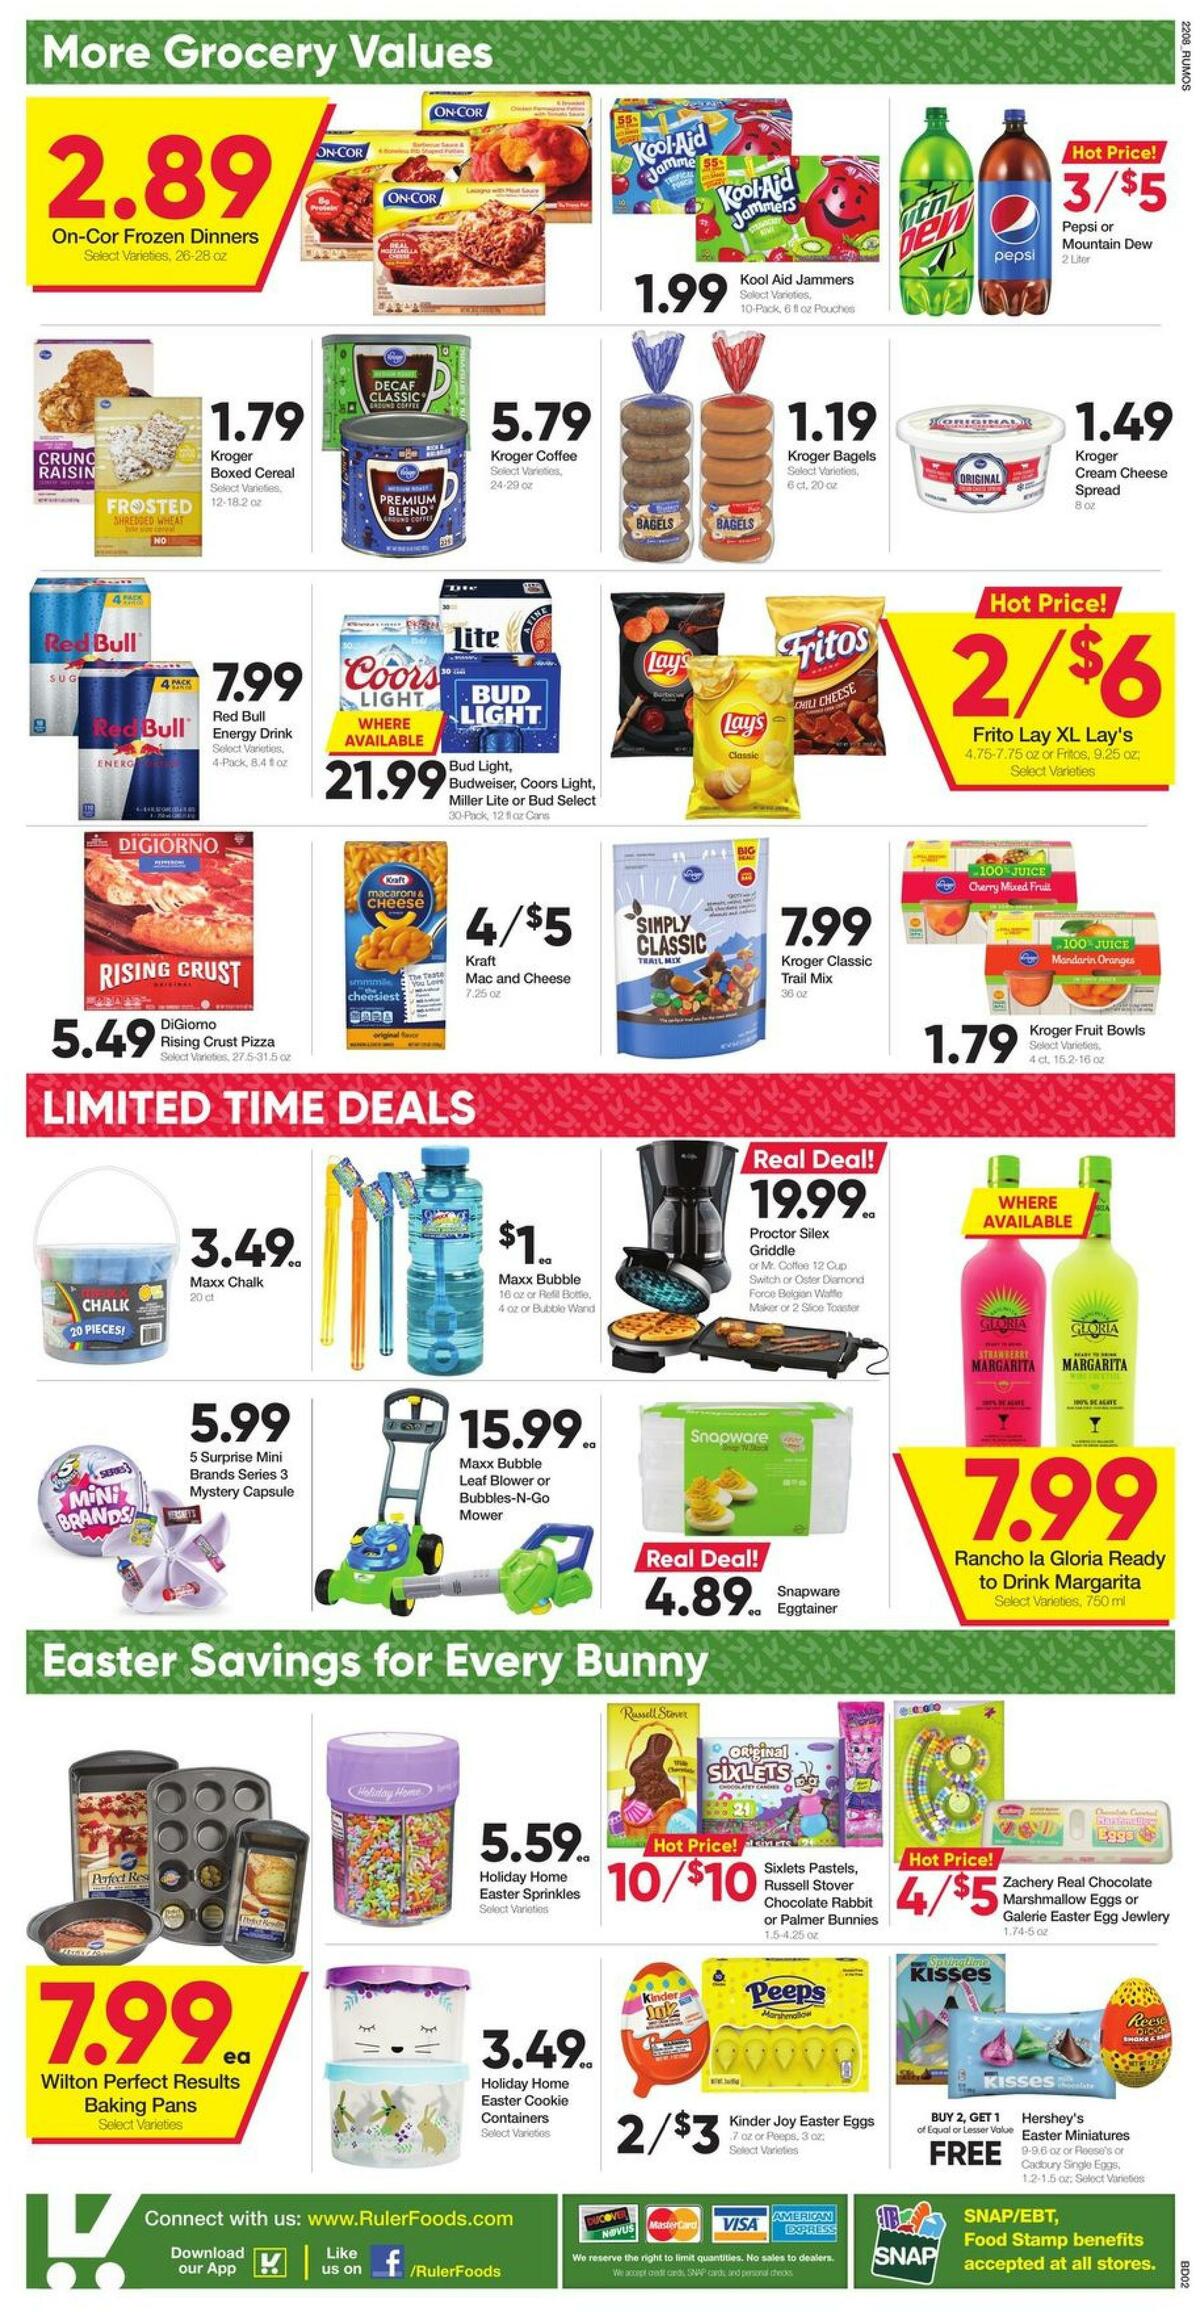 Ruler Foods Weekly Ad from March 23